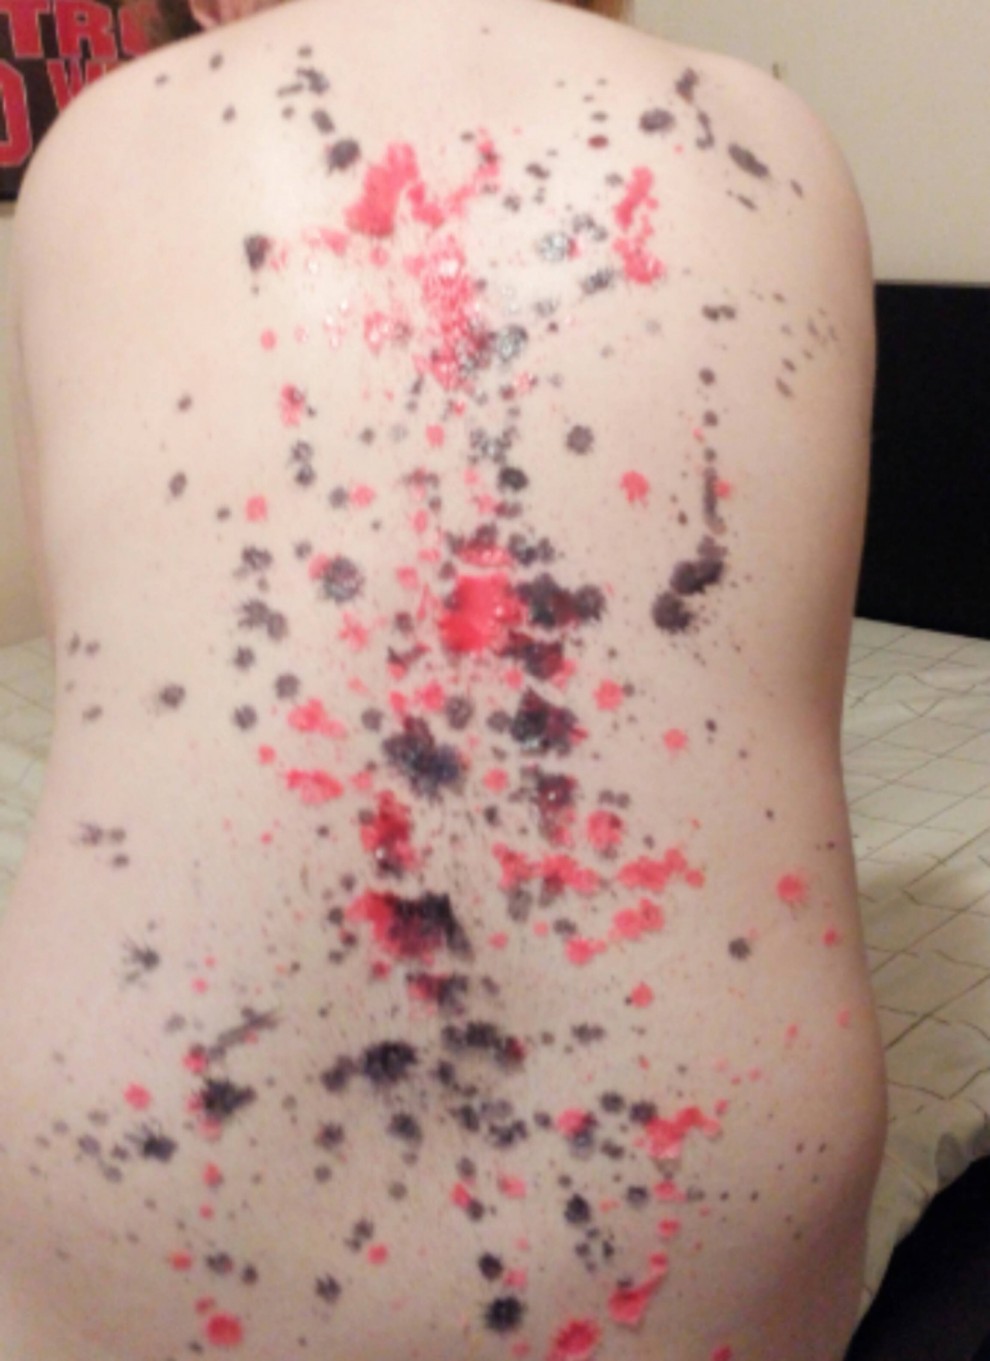 Becoming a little more com[f]ortable with wax play...still room for improvement though